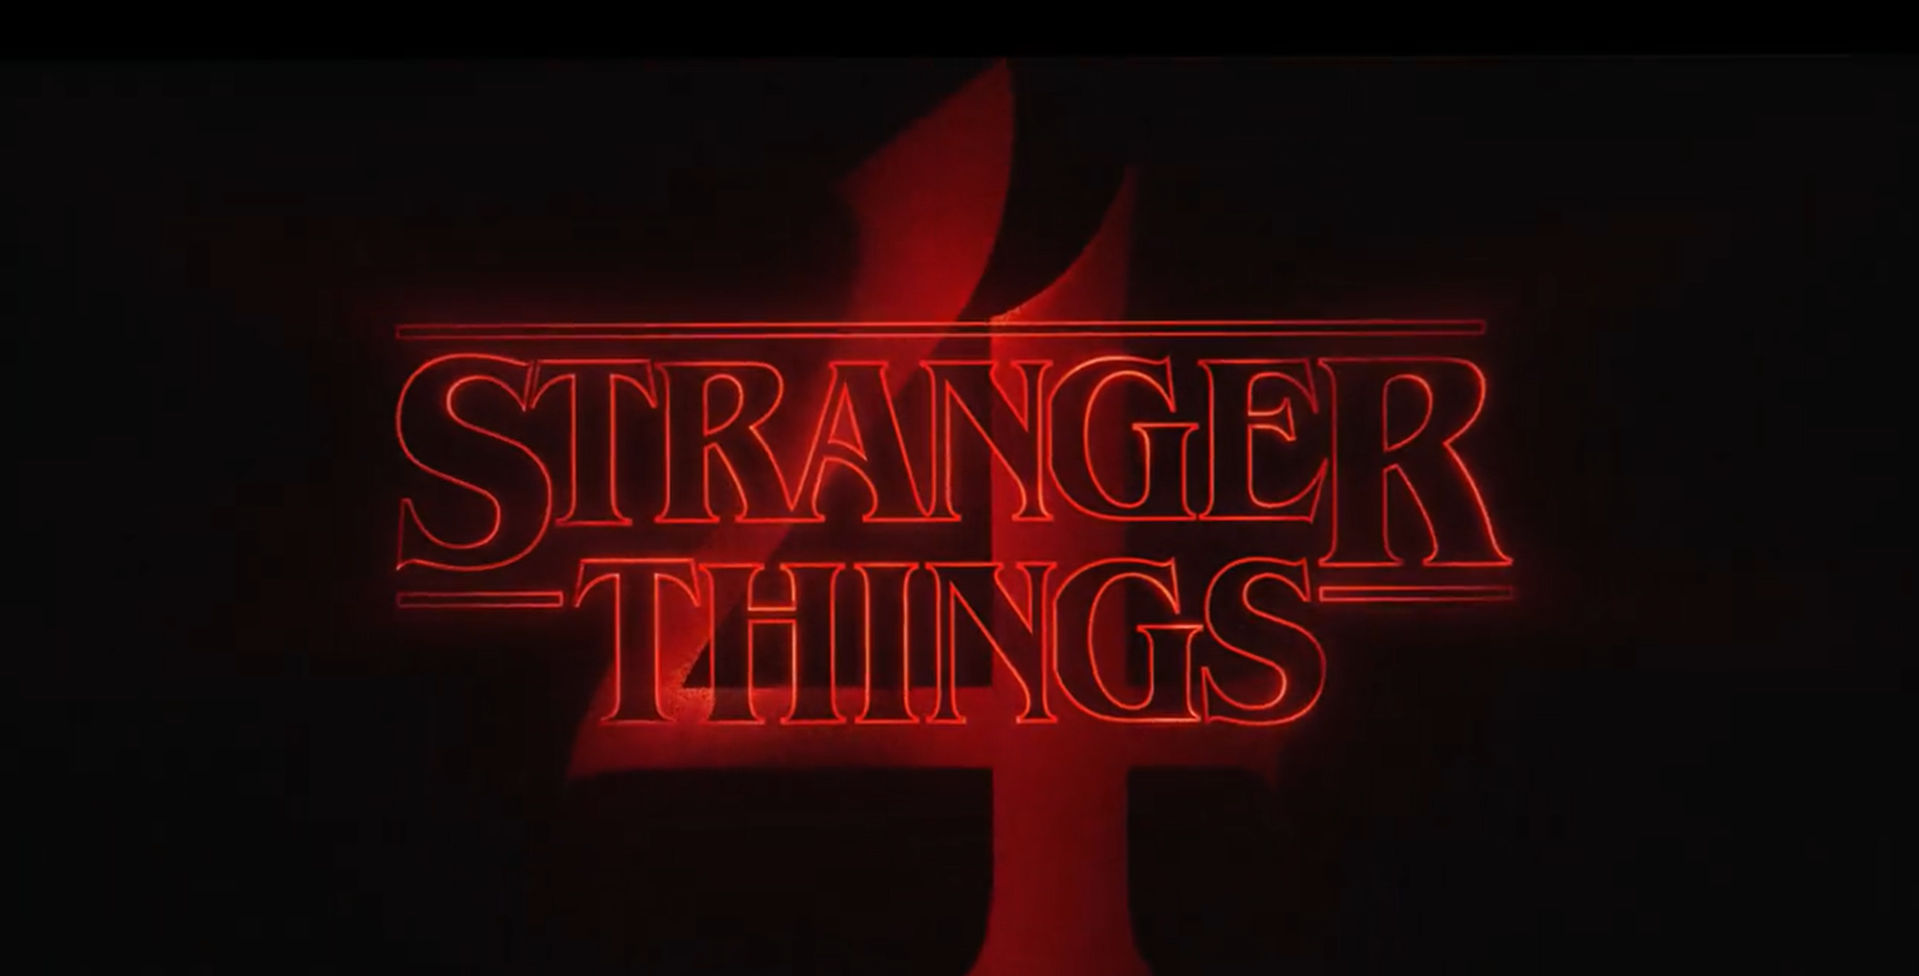 ‘Stranger Things’ Season 4: Makers reveal what’s in store